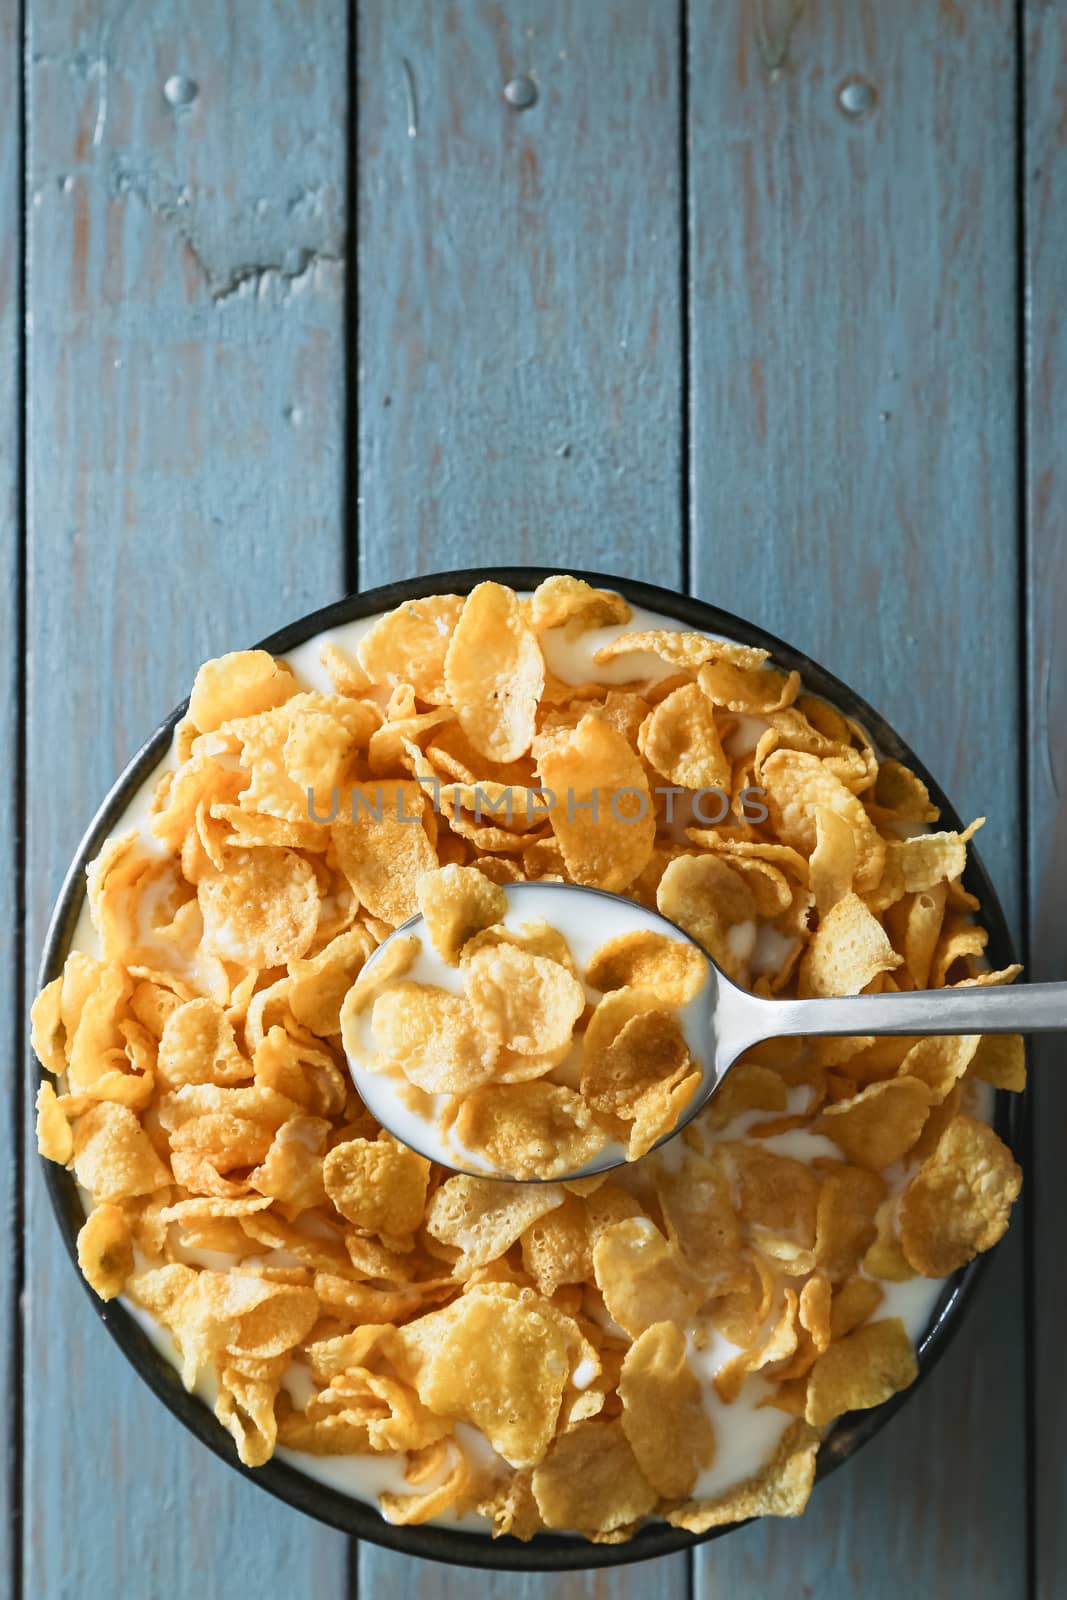 cornflakes with milk on wooden table